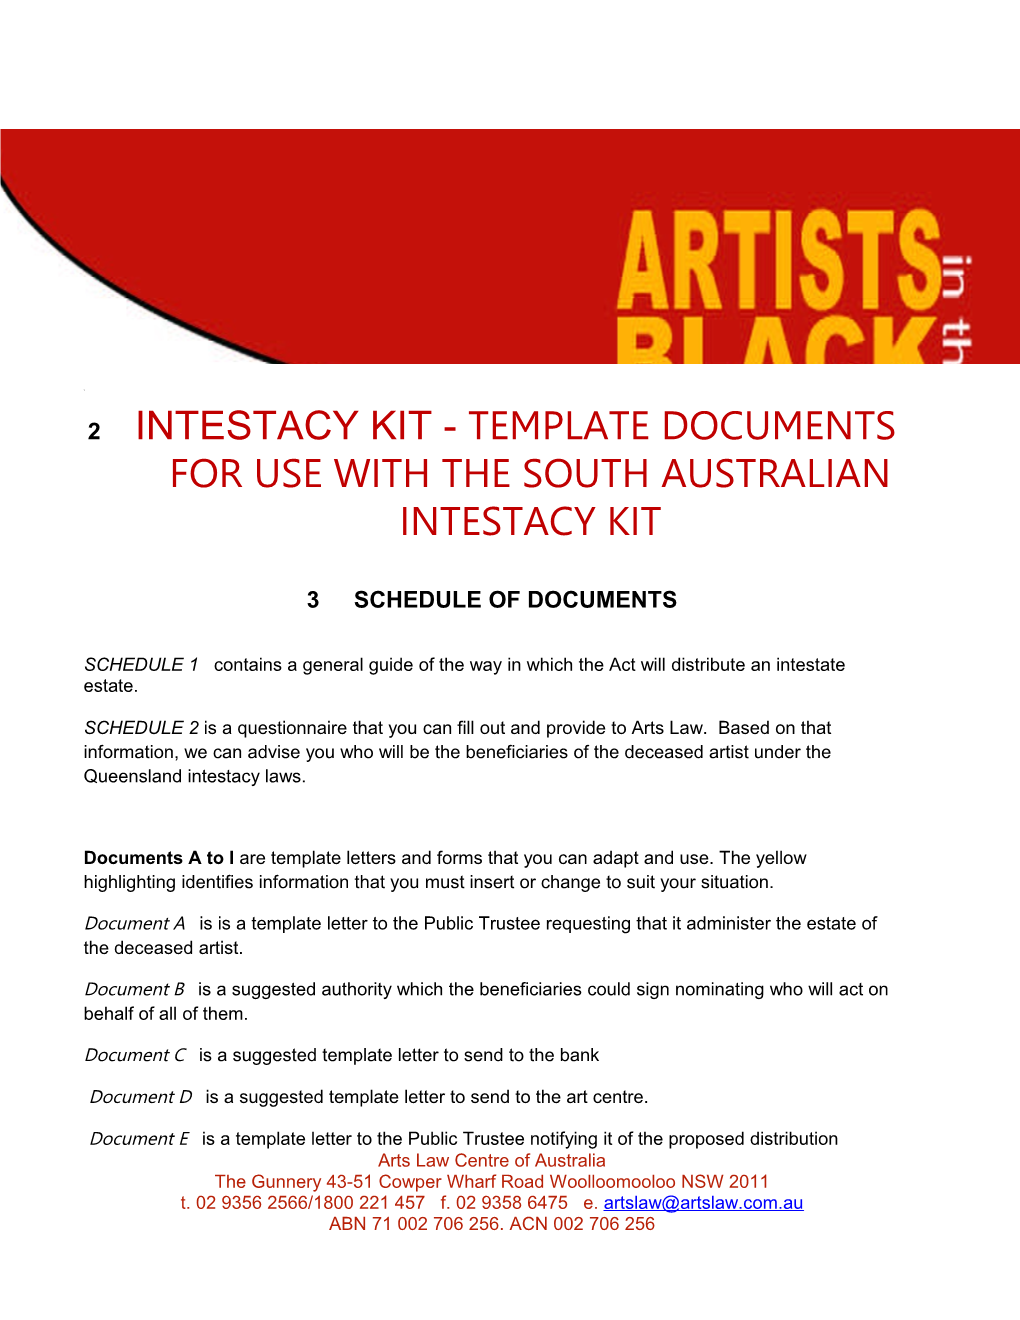 Intestacy Kit -Templatedocuments for Use with the South Australian Intestacy Kit